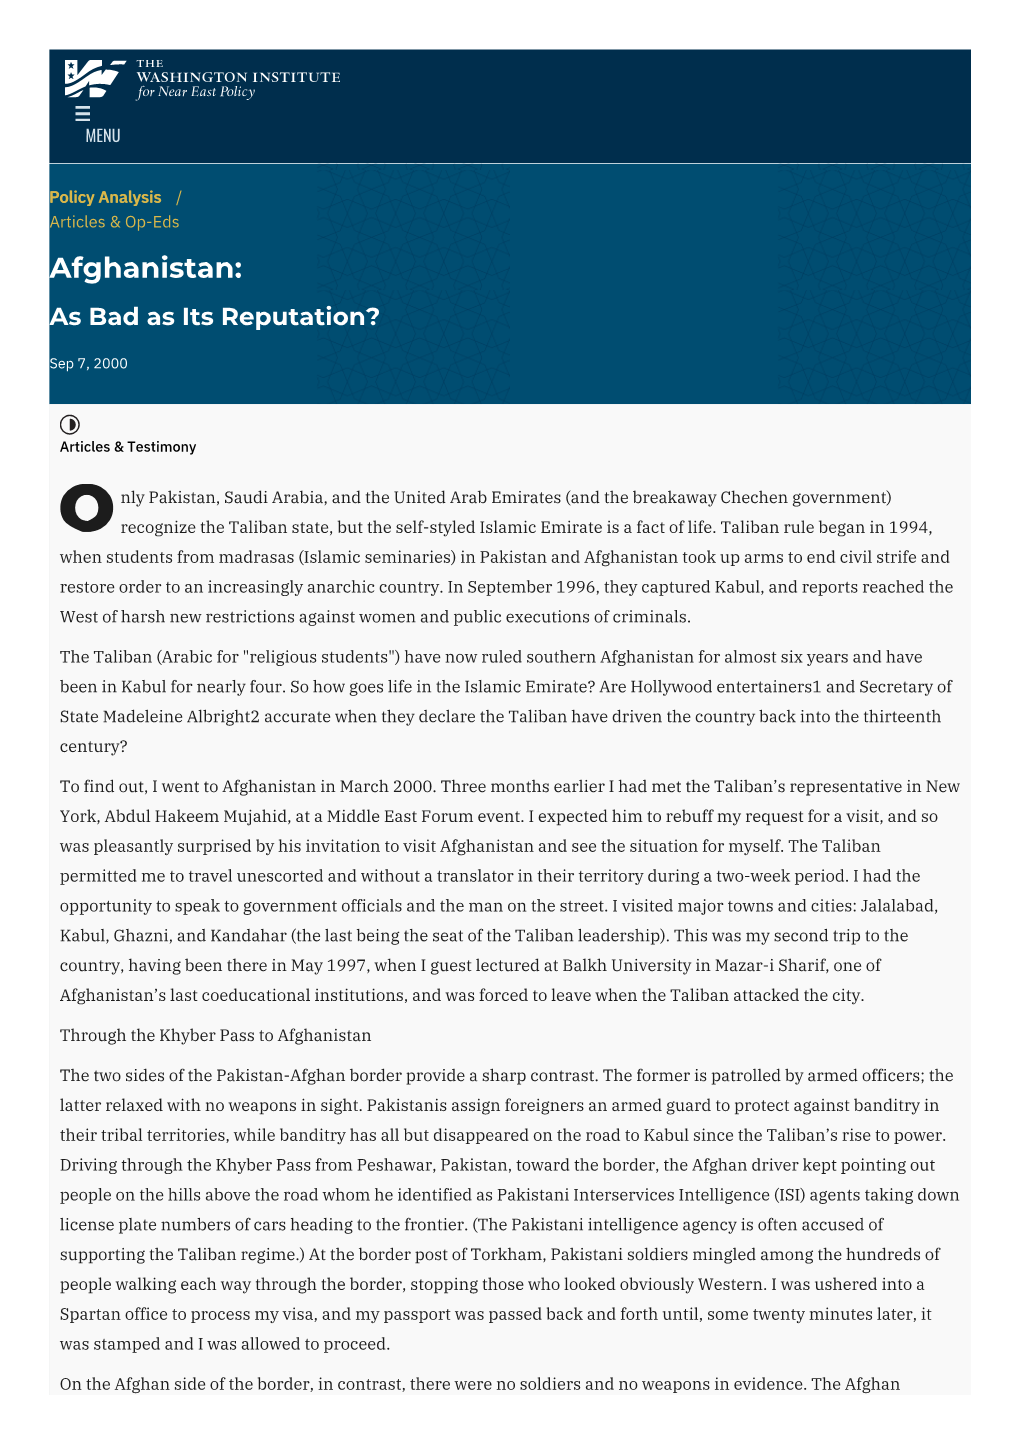 Afghanistan: As Bad As Its Reputation? | the Washington Institute